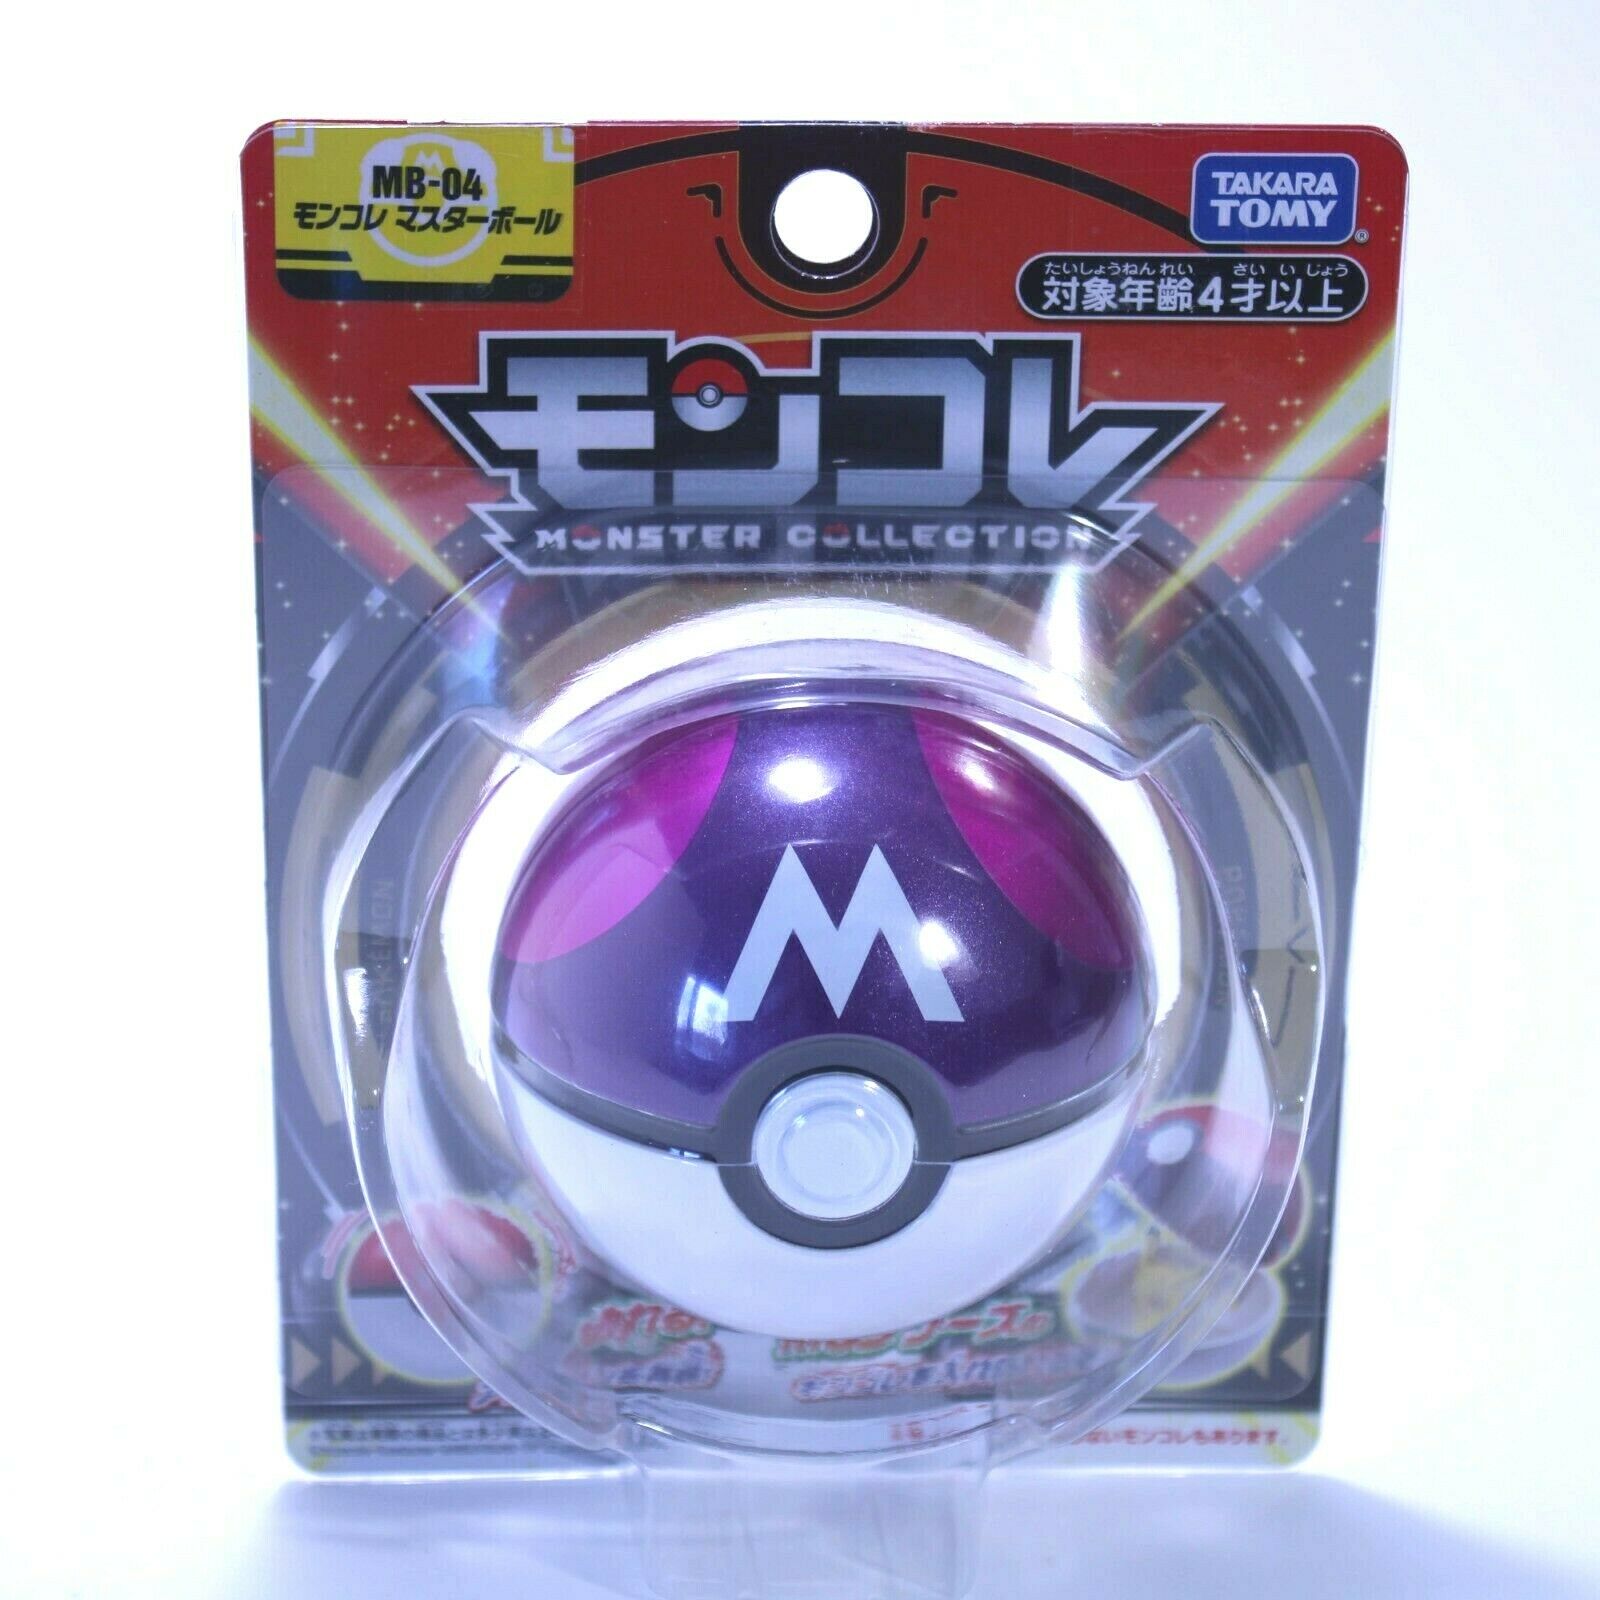 Pokemon Moncolle Master Ball Pokeball MB-04 for 2 Inch Scale Figures